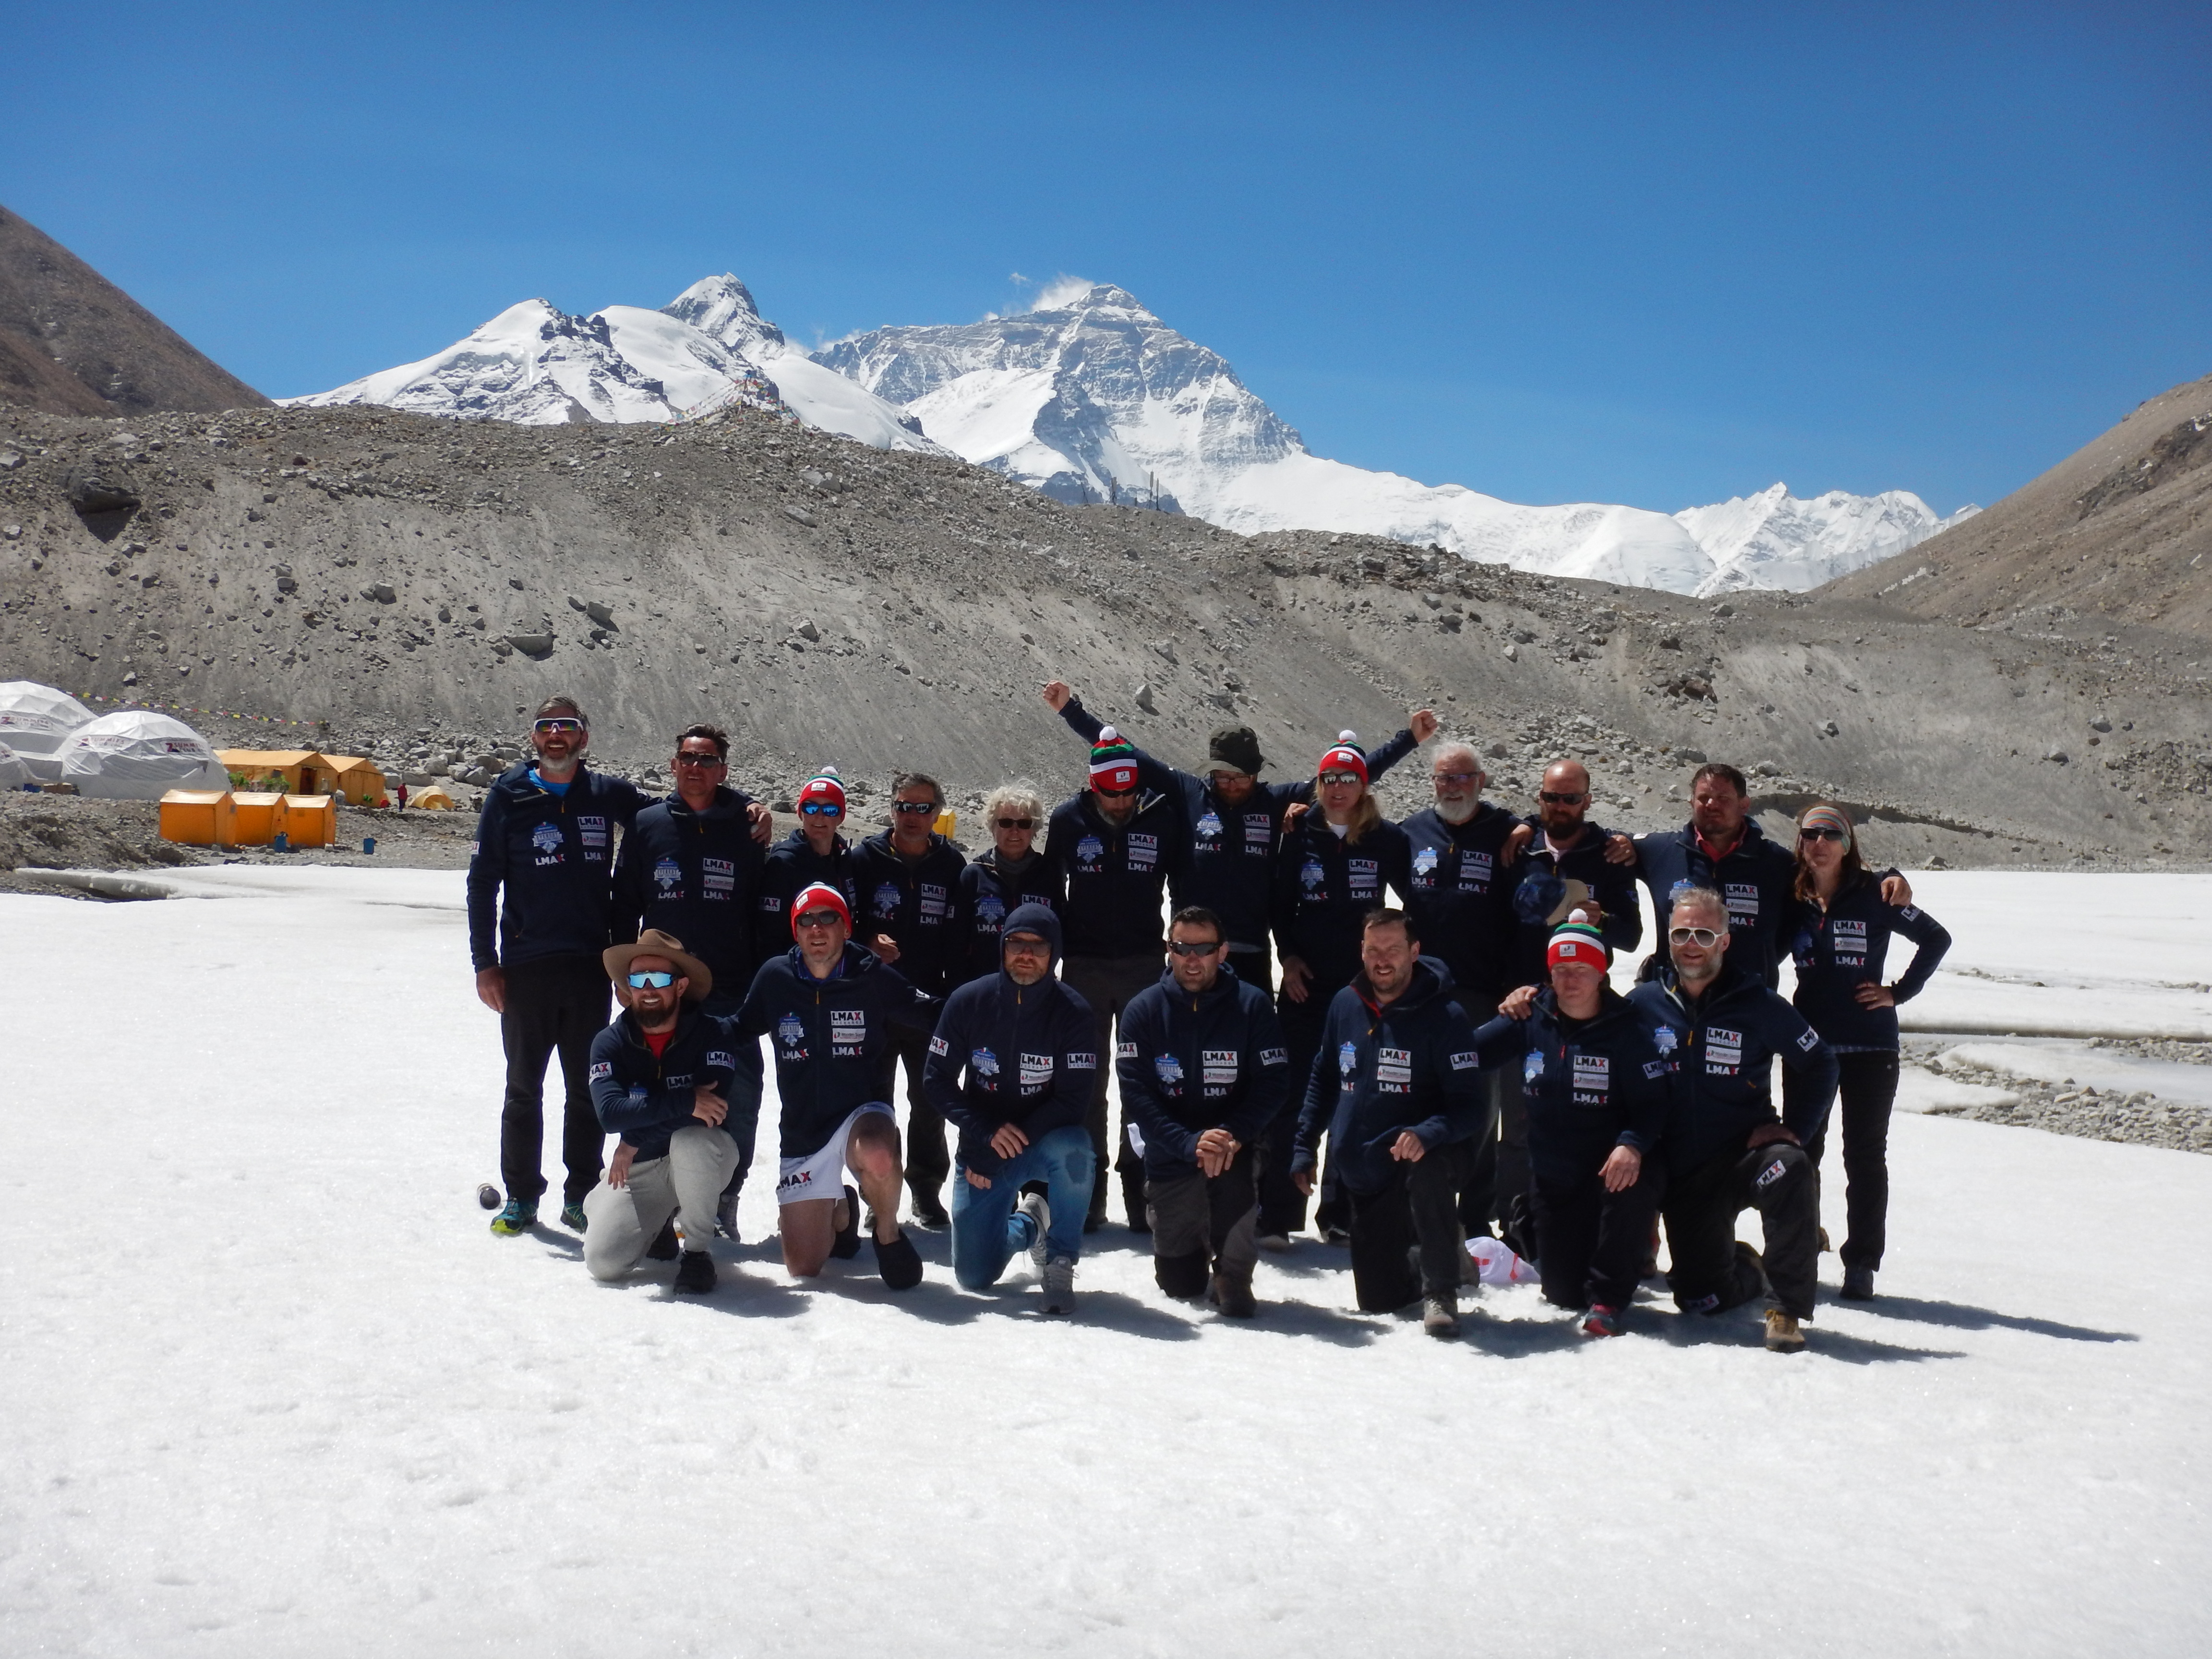 The Team posing on the pitch at Everest Base Camp, Tibet , China  (28°8′29″N 86°51′5″E).